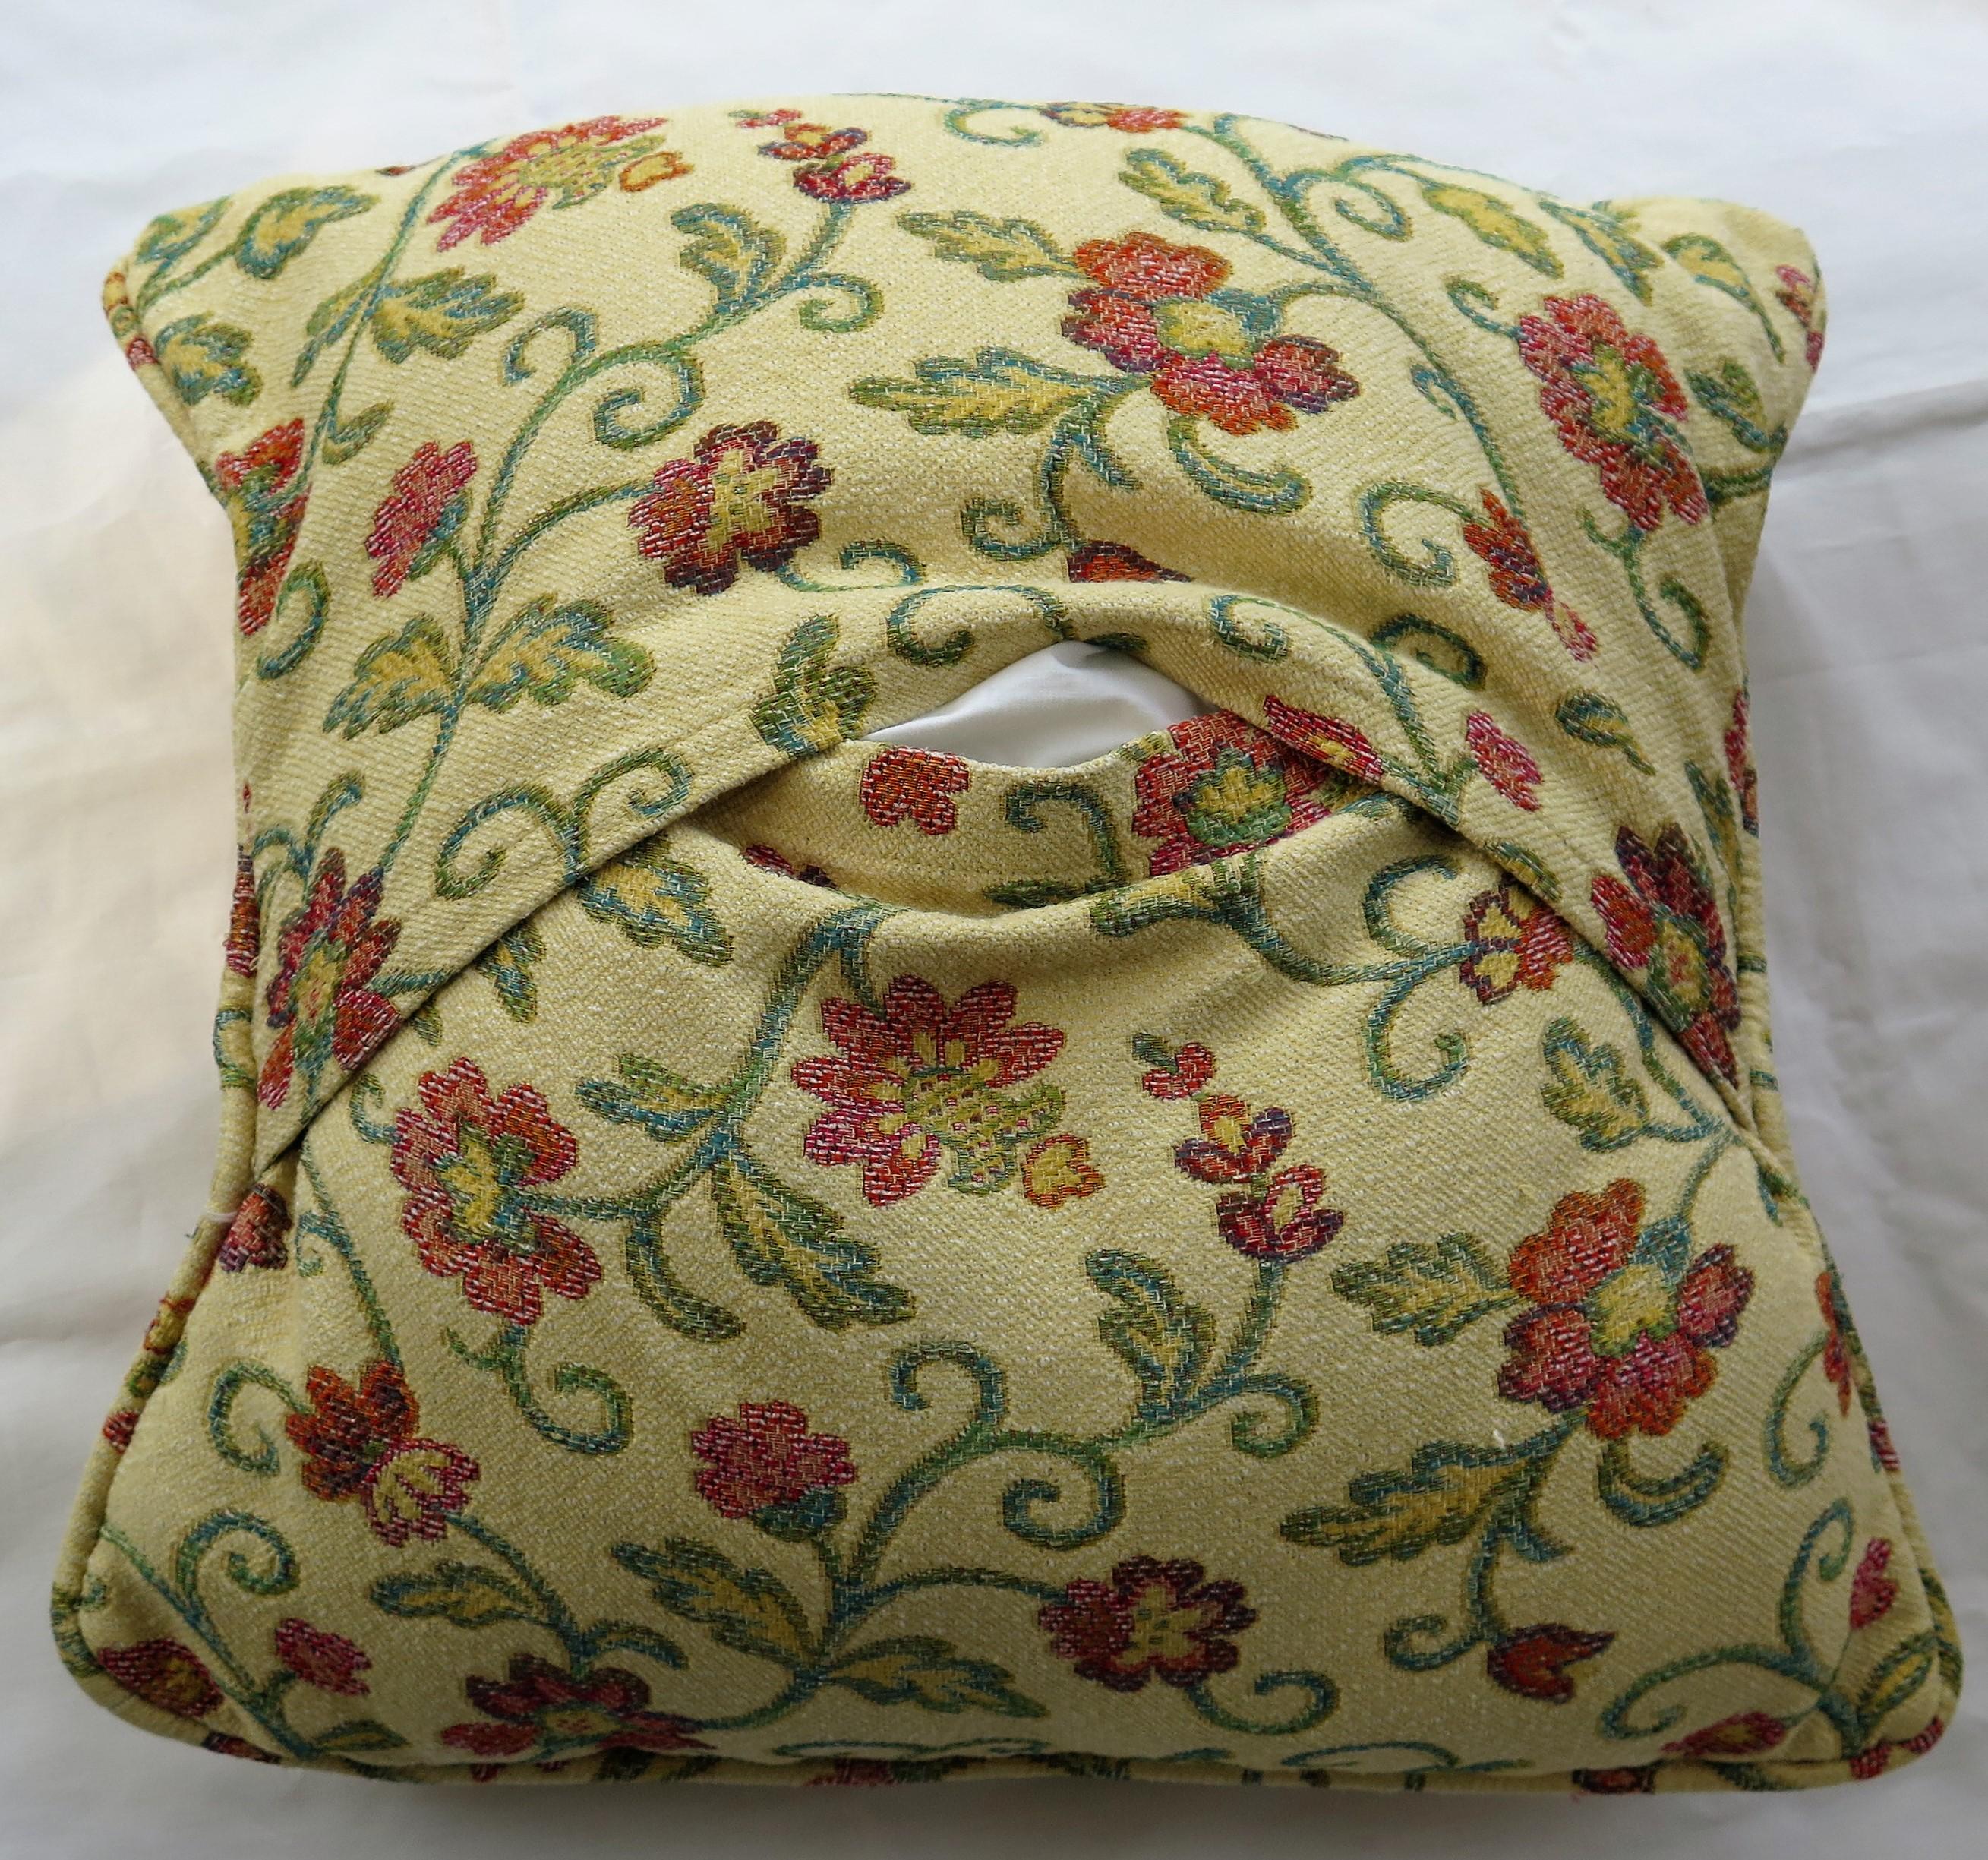 Woven Cushion or Pillow in Art Nouveau Floral Vine Style, 20th Century For Sale 6